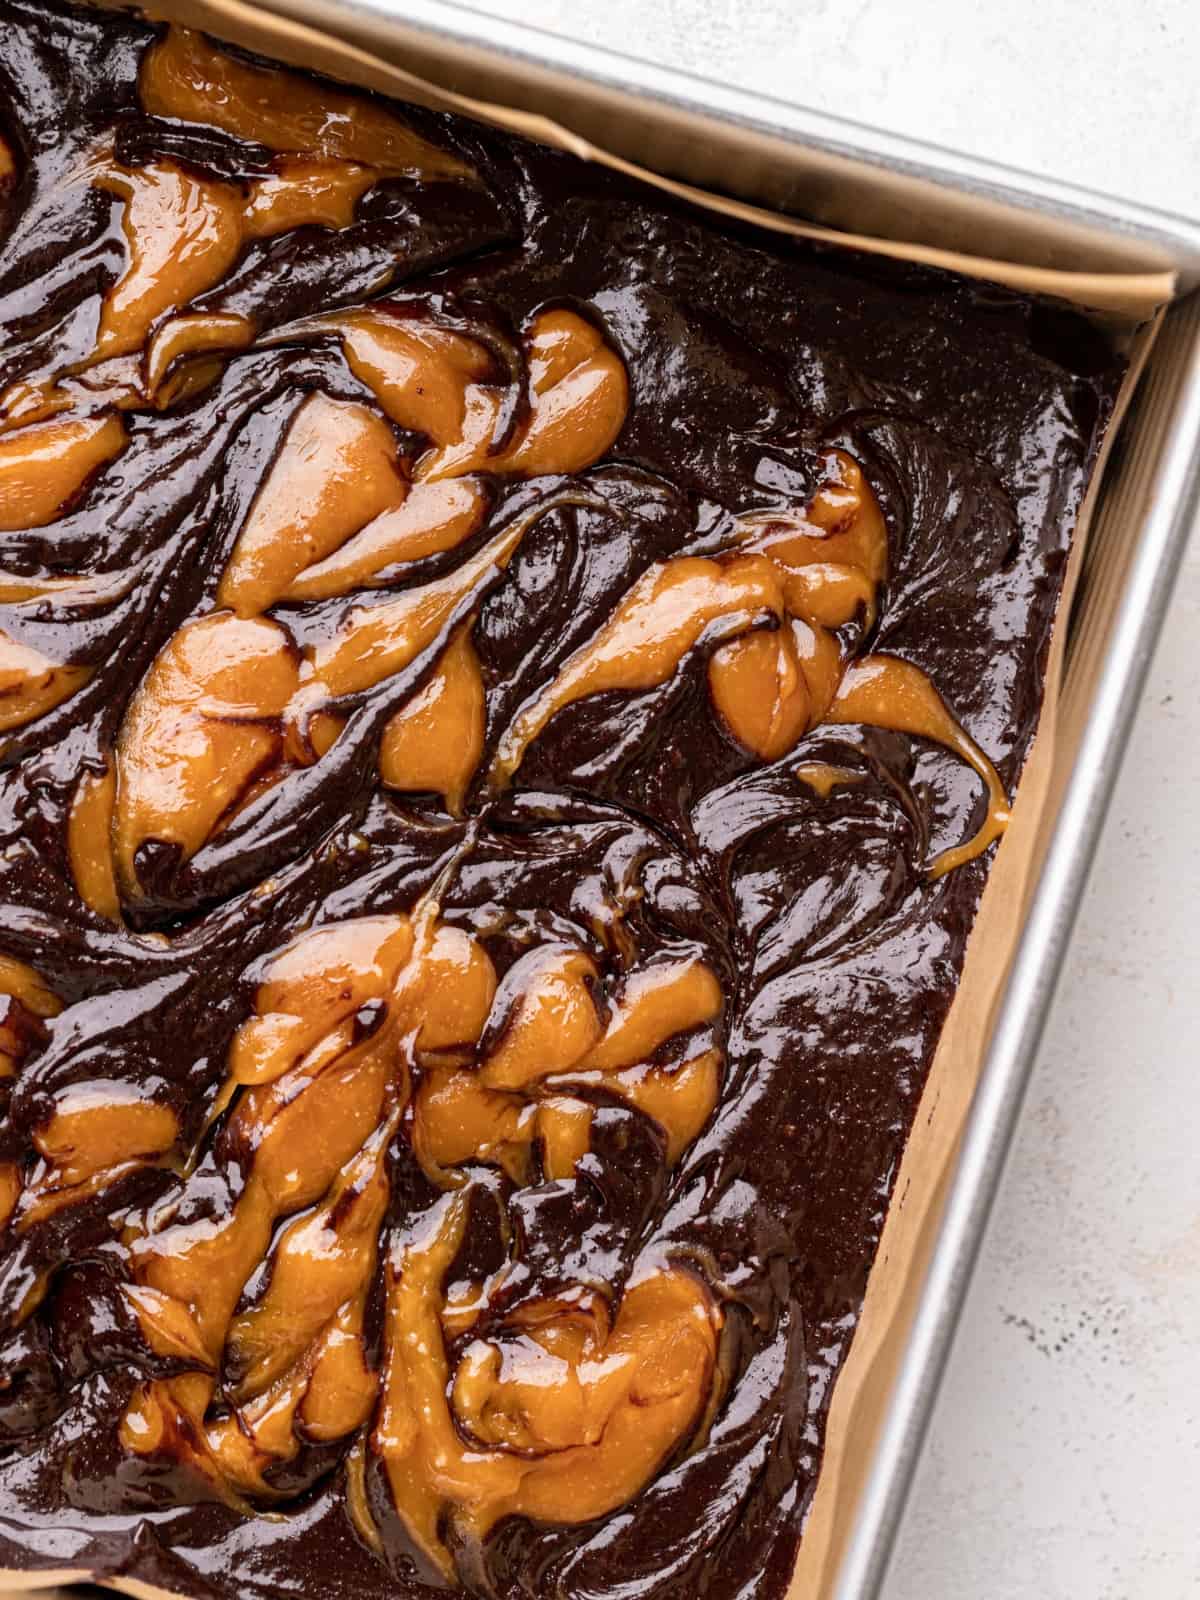 swirled caramel on top of the brownie batter.